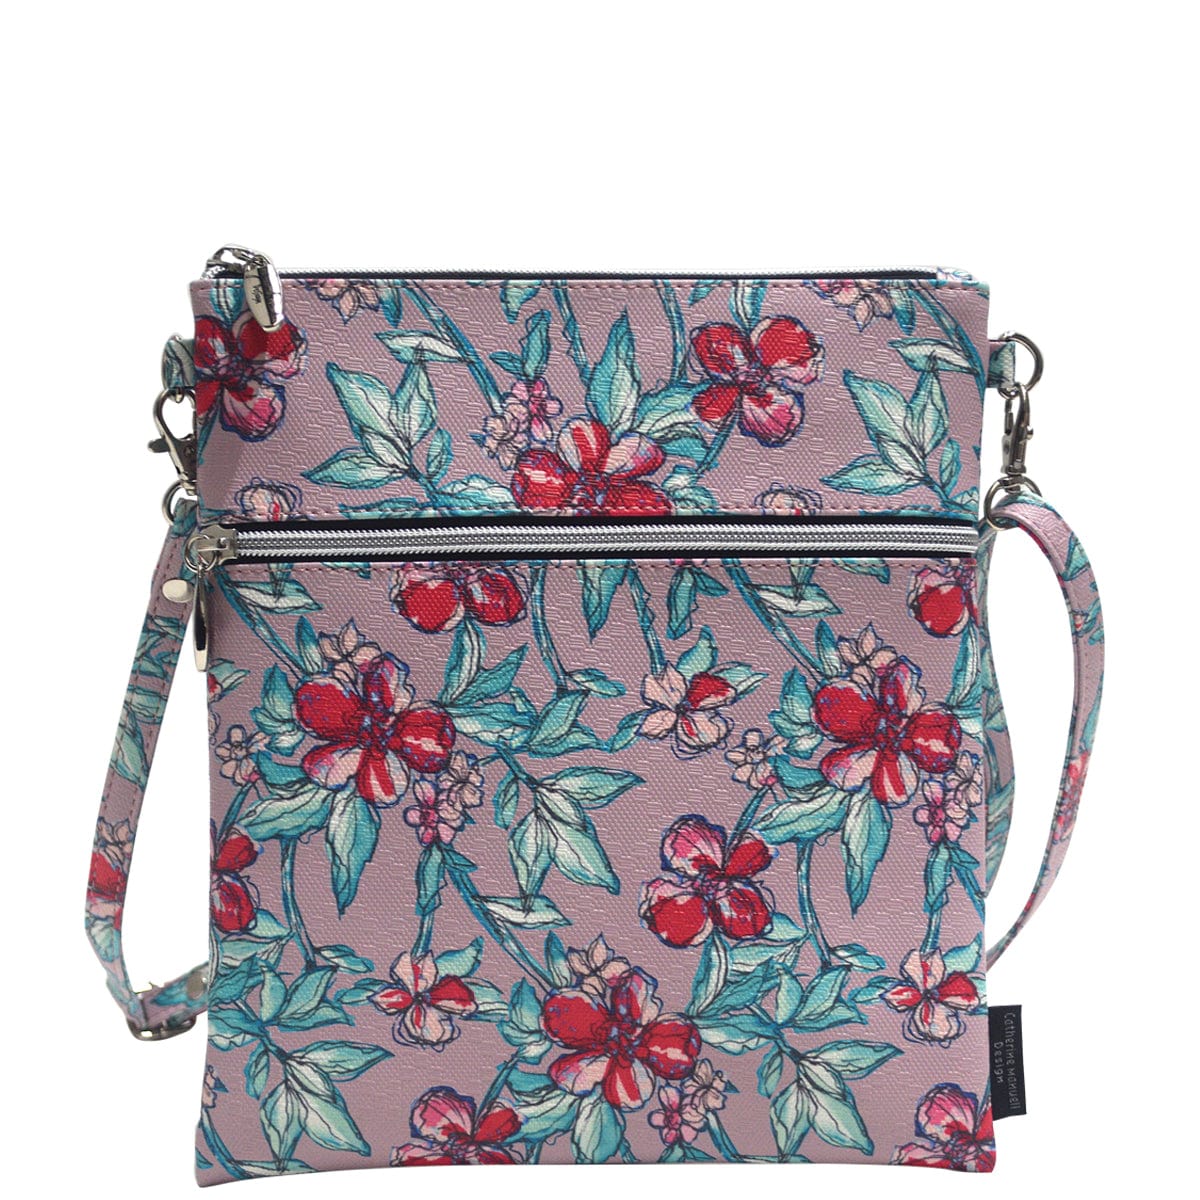 Roma Tote - Tan Red Sketch Flower - 50% off